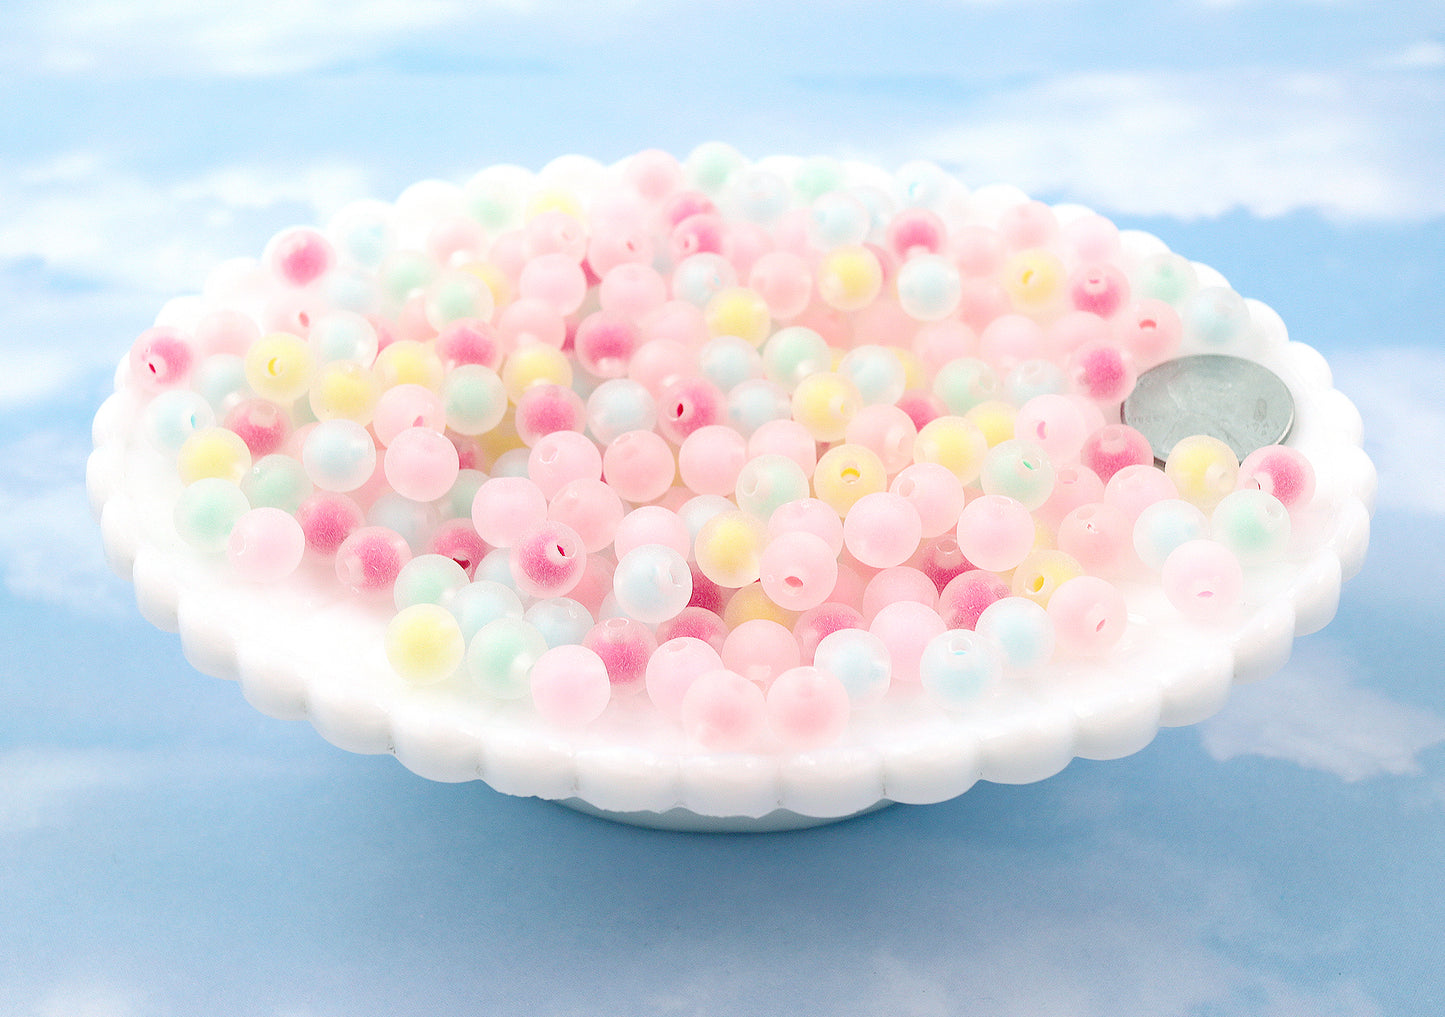 Pastel Beads - 8mm Tiny Matte Pastel Double Inner Bead Resin or Acrylic Beads - 200 pc set